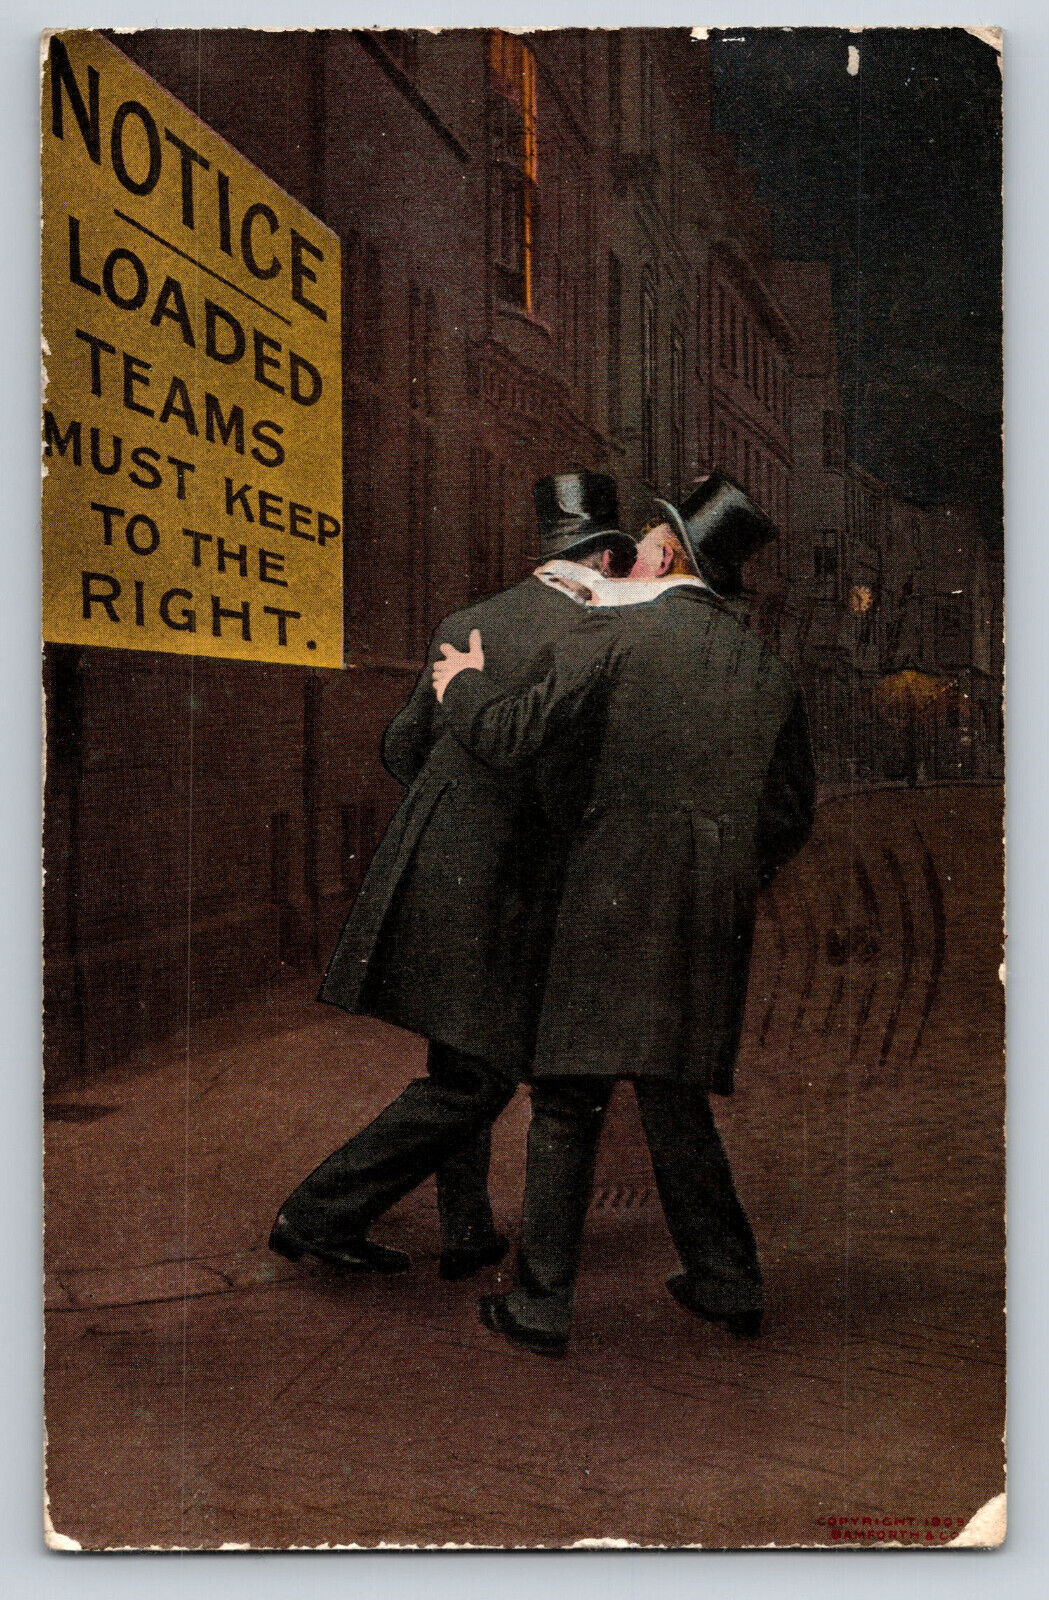 Notice Loaded Teams Must Keep To The Right Postcard 2 Guys Whispering 1910